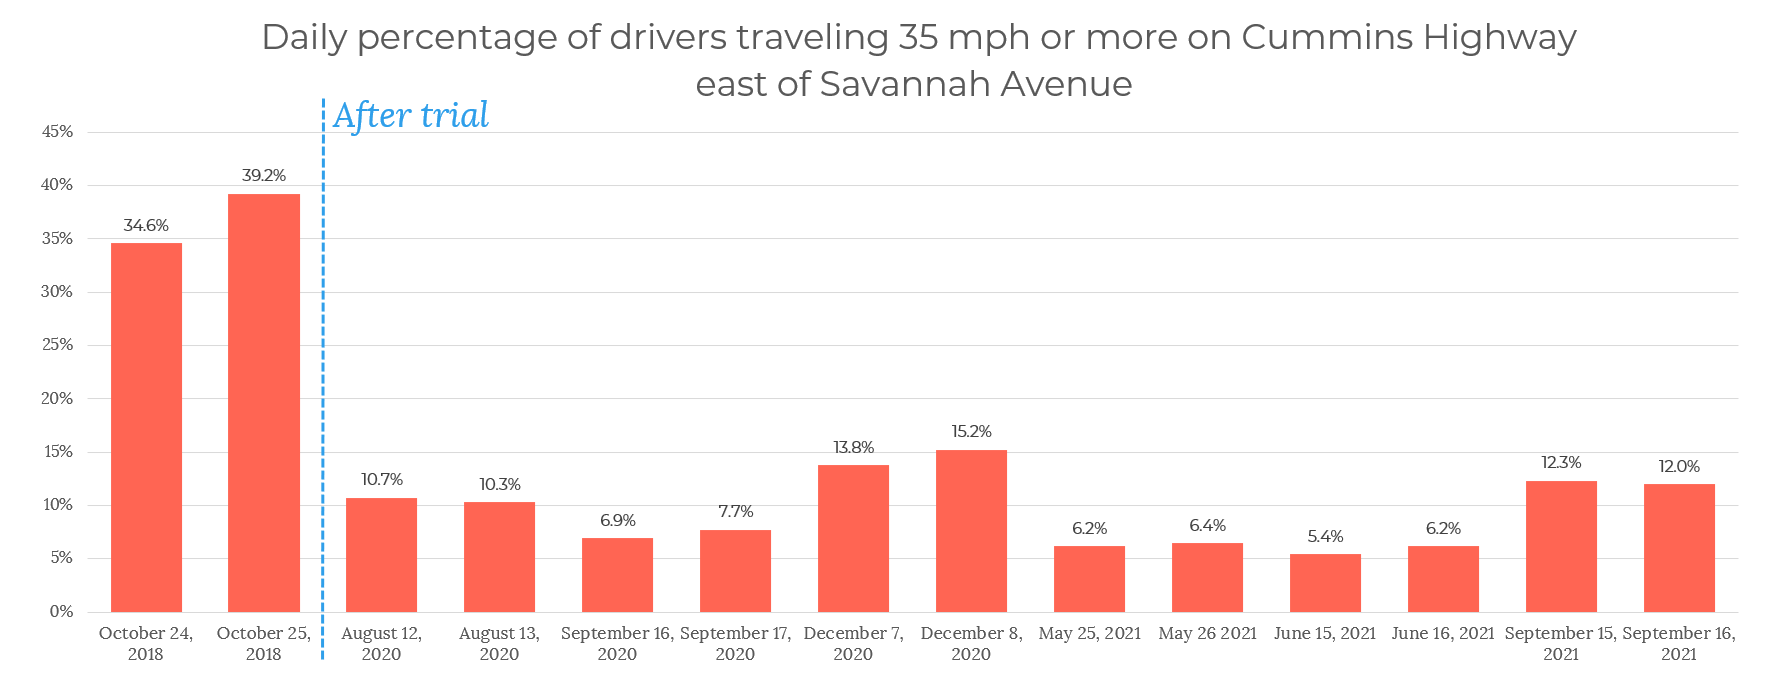 A bar chart shows percentage of drivers traveling at or above 35 mph on Cummins Highway east of Savannah. Data were collected on two consecutive days in October 2018, August 2020, September 2020, December 2020, May 2021, June 2021, and September 2021. In October 2018, the percentage of drivers traveling at or above 35 mph was 34.6 on the first day and 39.2 on the second day. Once the trial was installed (before August 2020), the percentage of drivers traveling at those speeds decreased significantly.